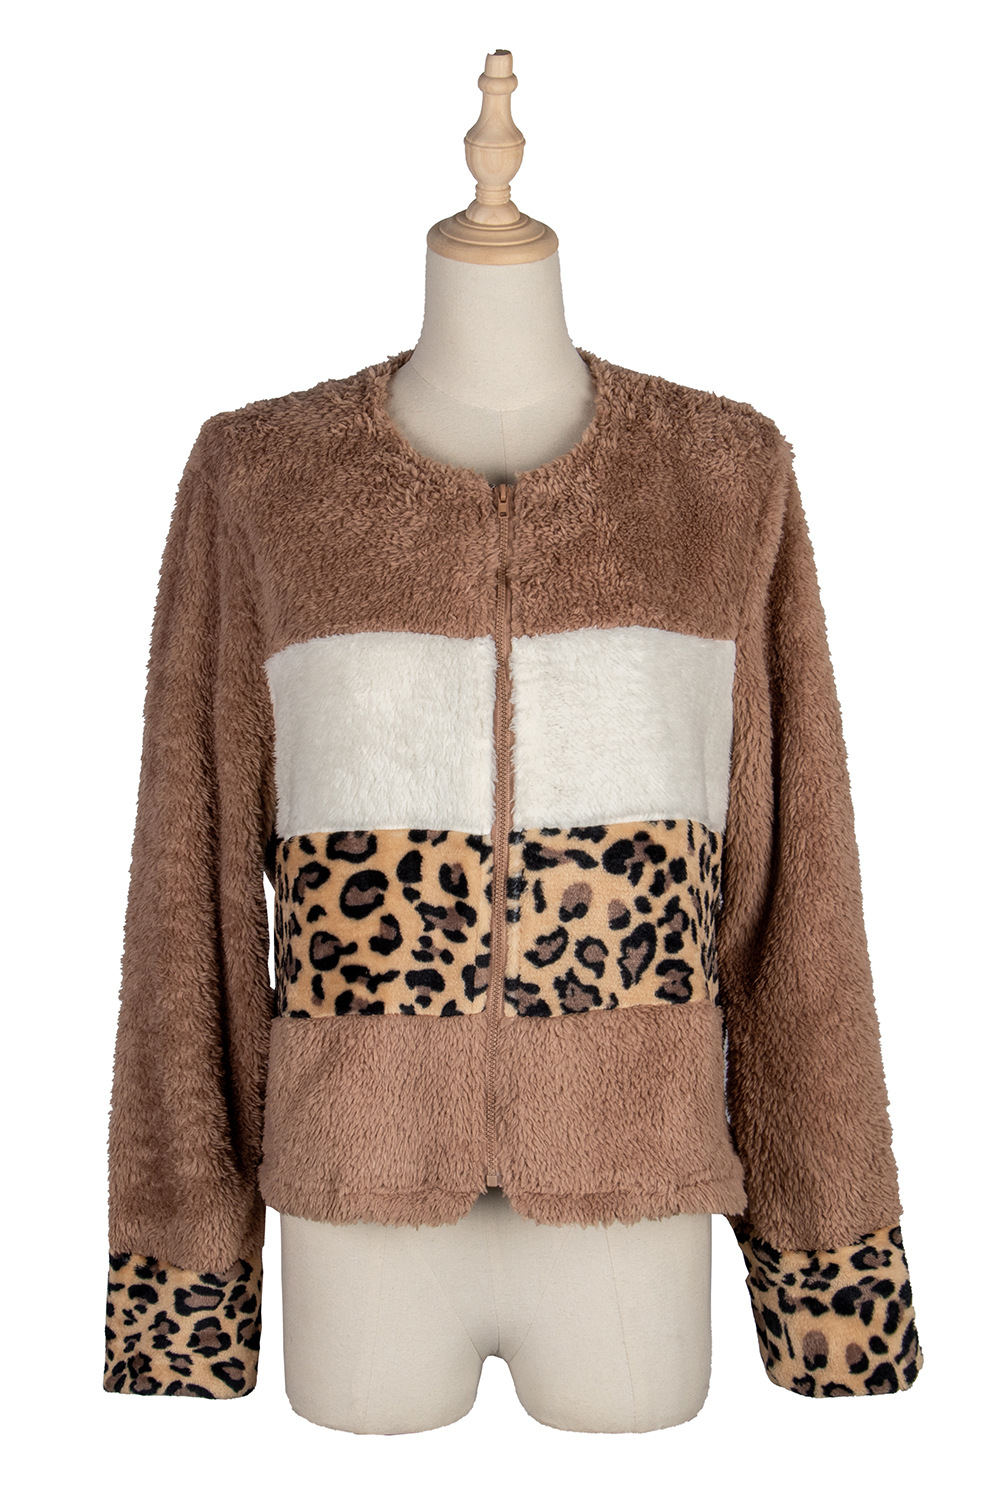 Women's Stitching Leopard Zipper Casual Flocking Autumn Jacket With Long Sleeves display picture 5